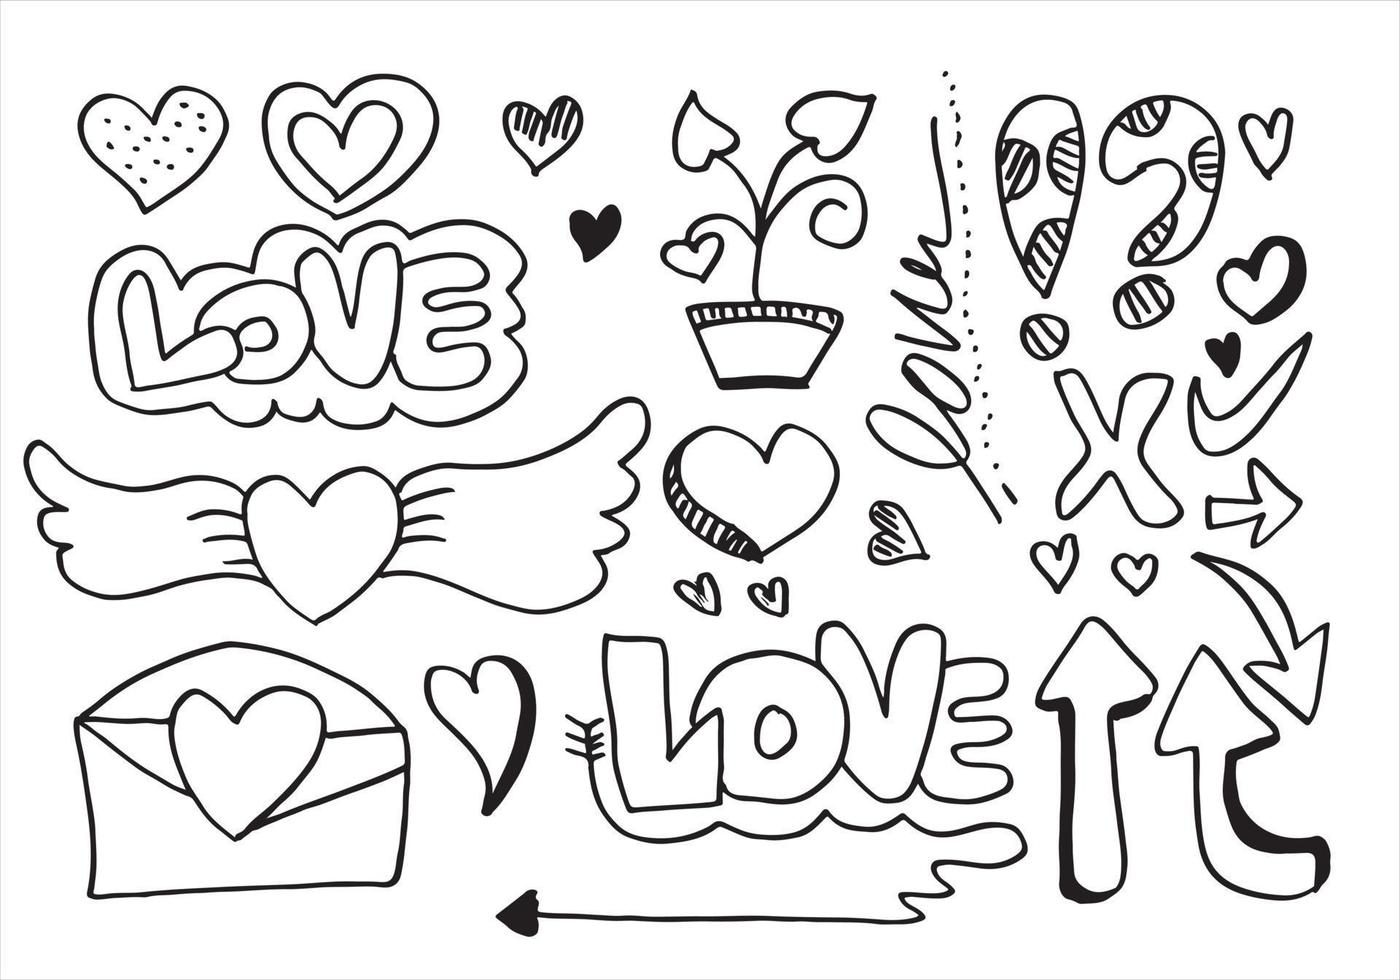 Hand drawn set elements, black on white background. Arrow, heart, love, exlamation for concept design. vector